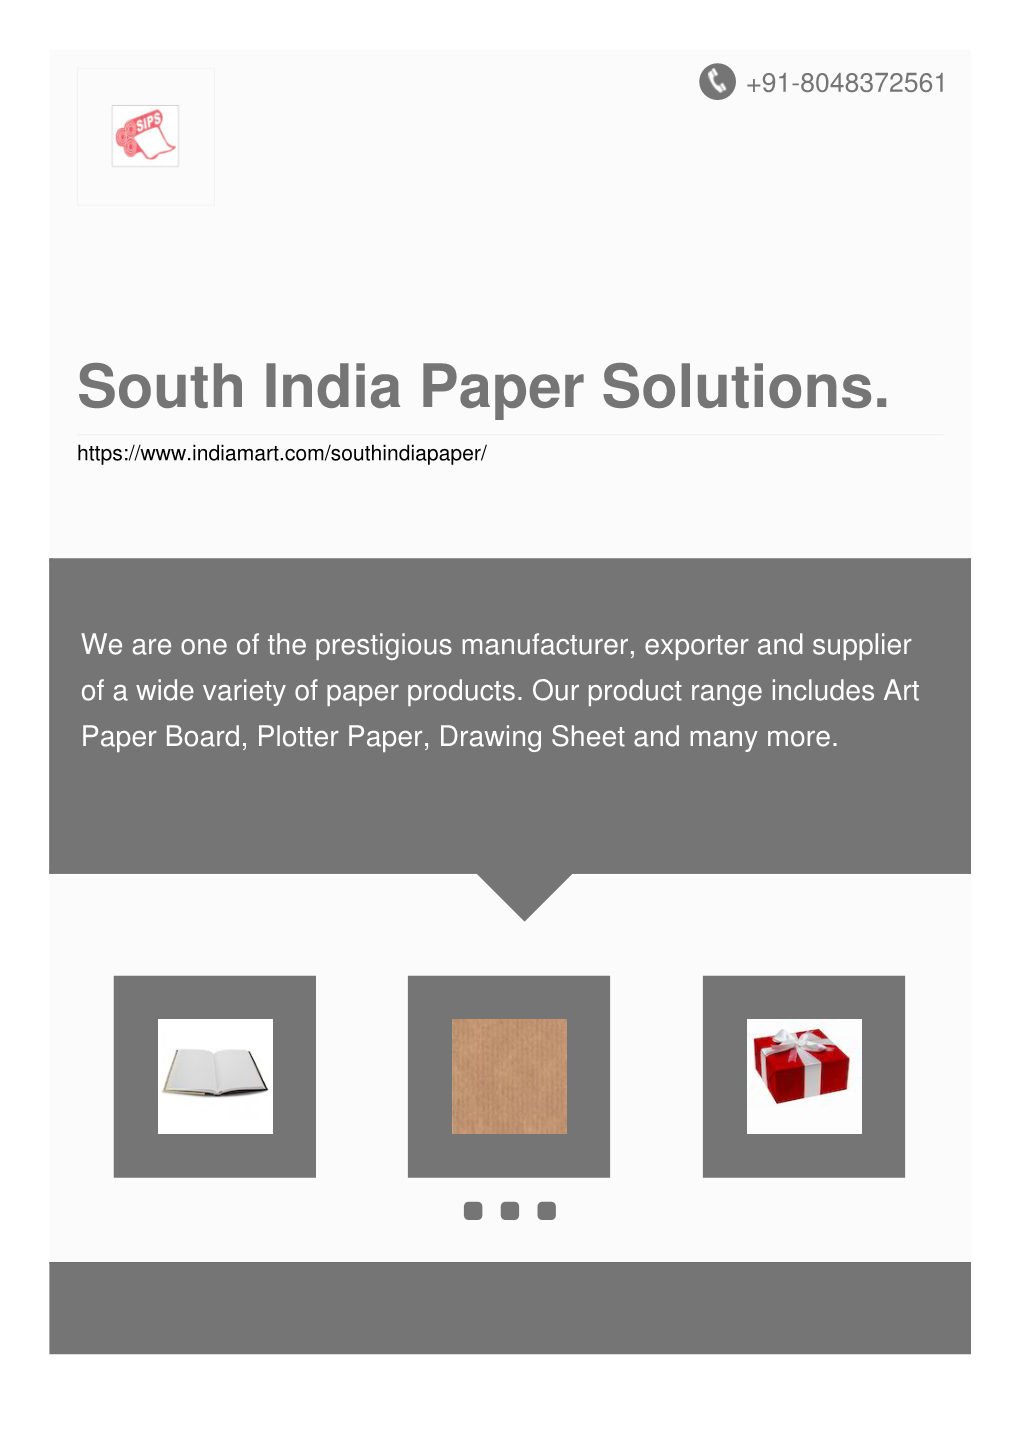 South India Paper Solutions